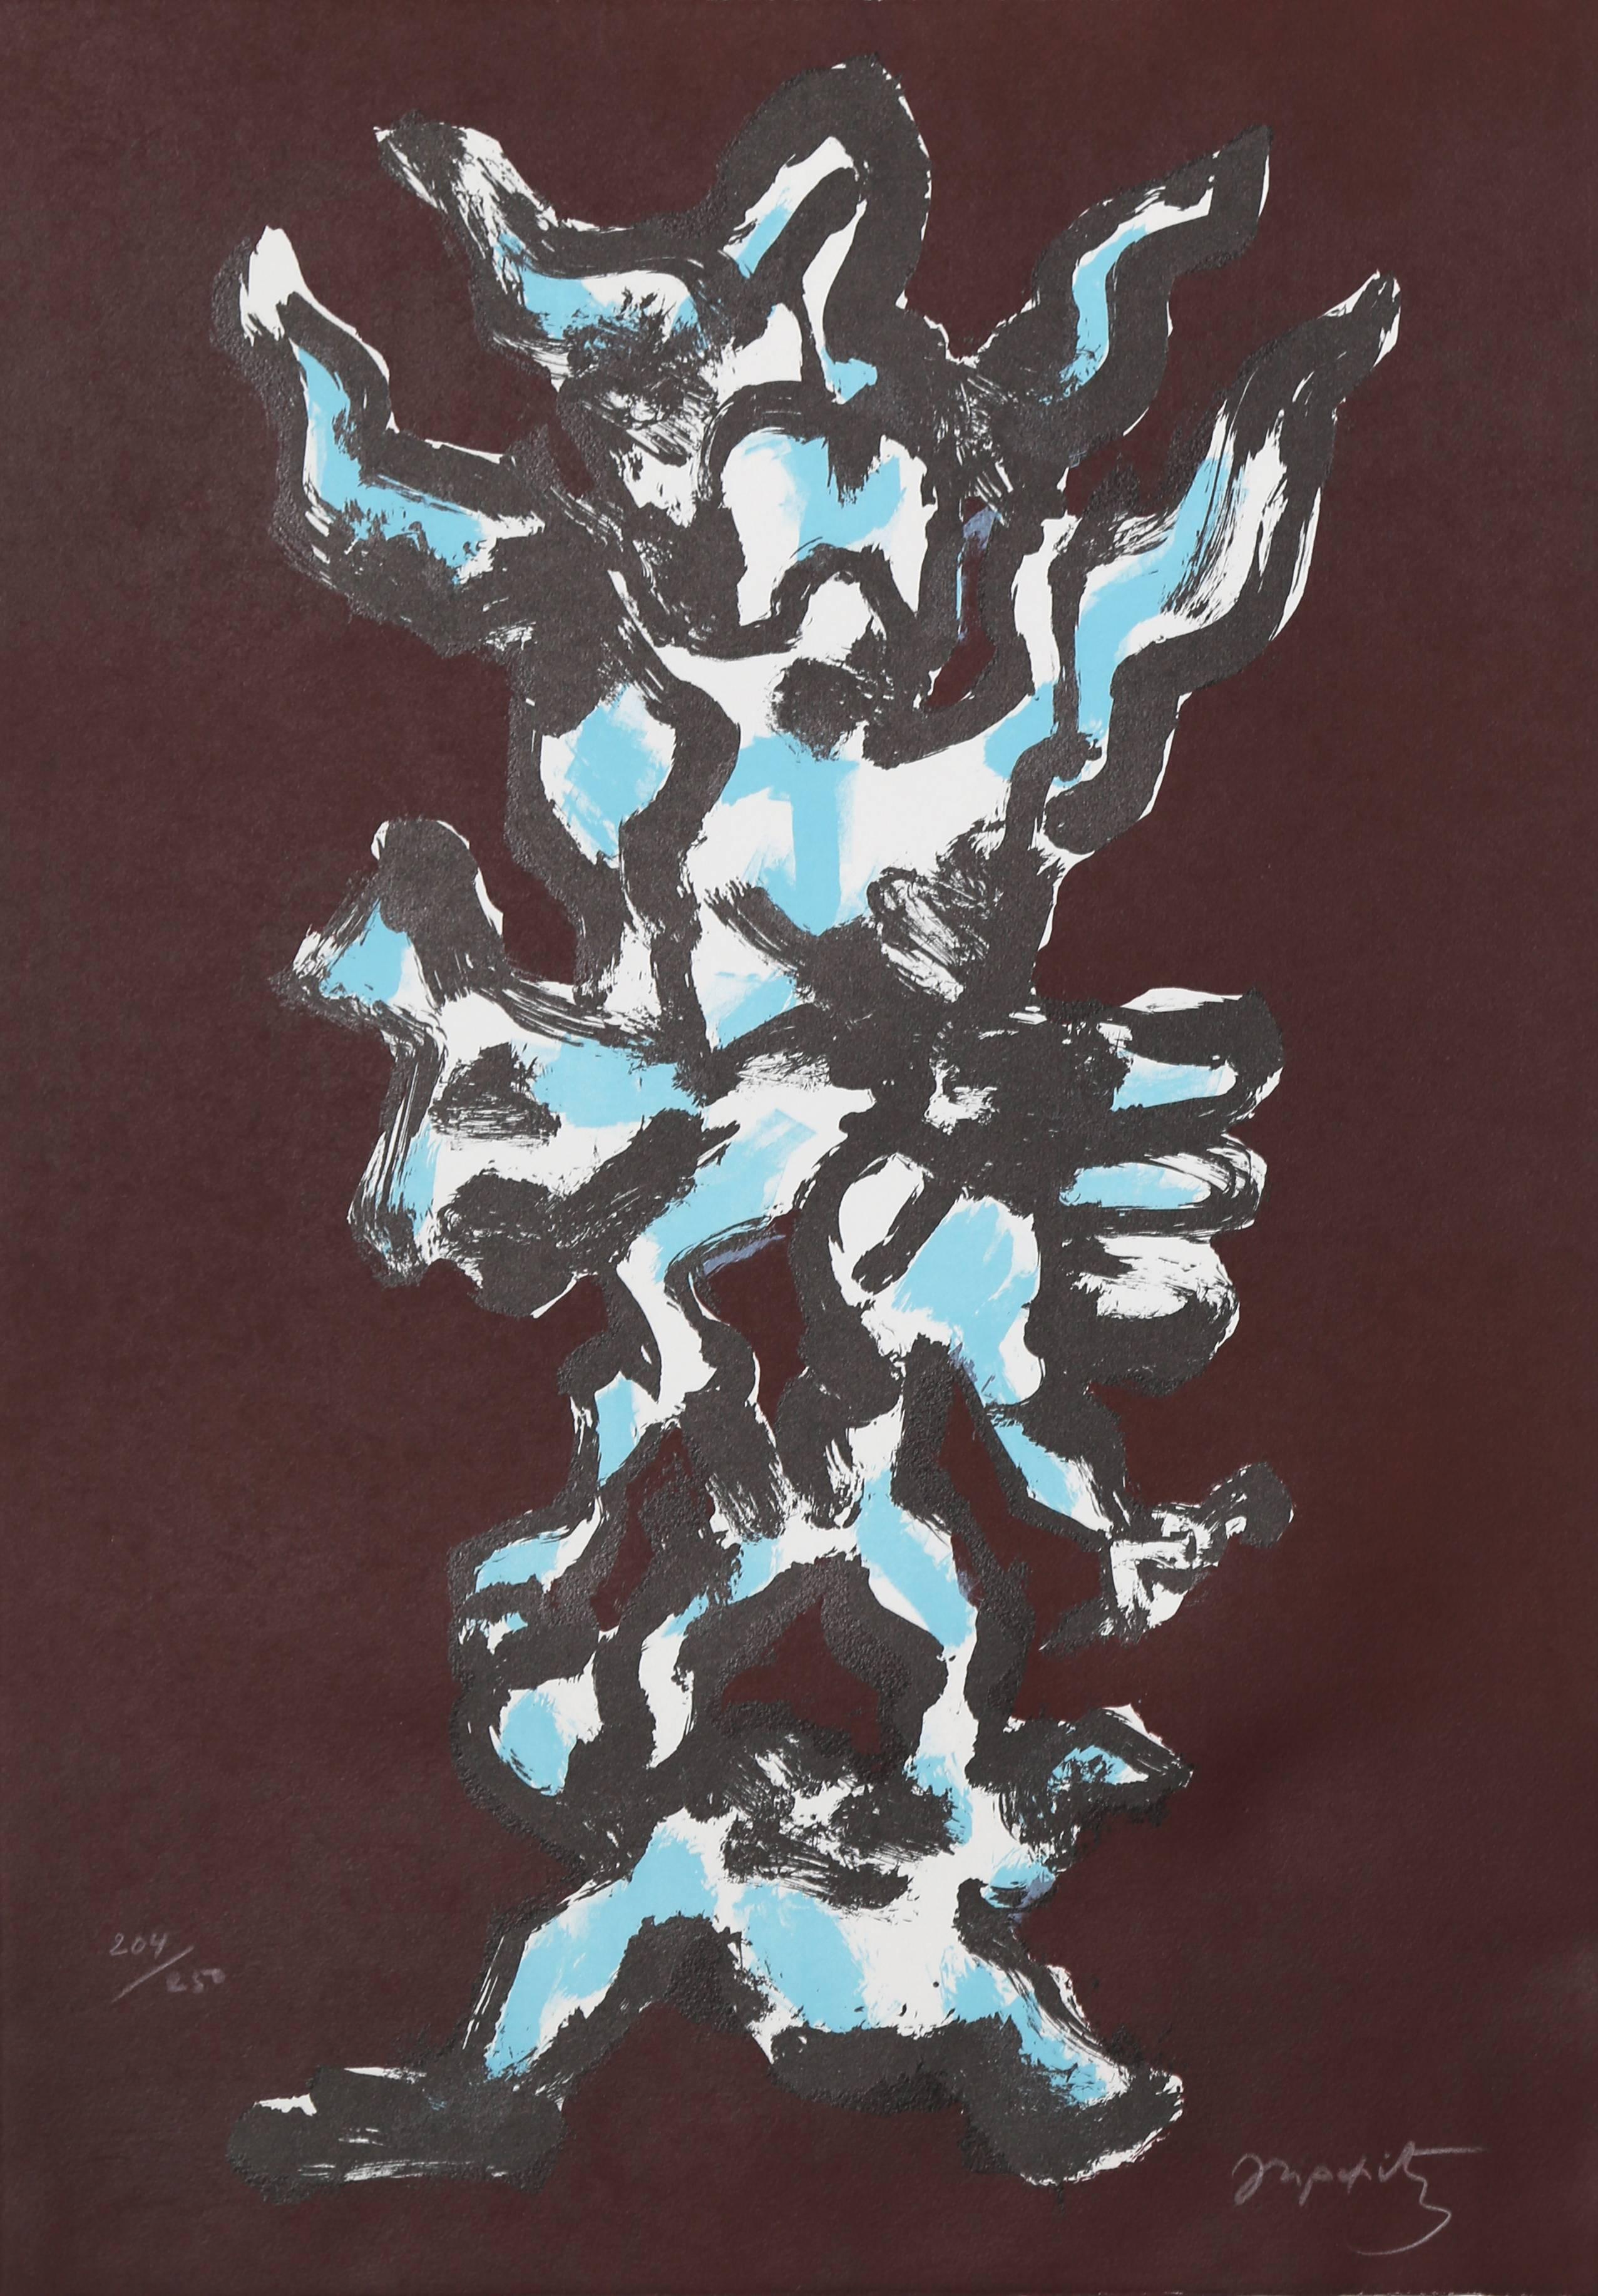 Artist: Jacques Lipchitz, Lithuanian (1891 - 1973)
Title: Tree of Life 
Year: 1972
Medium: Portfolio of Three Lithographs, each signed and numbered in pencil
Edition: 250
Size of each: 26 in. x 18 in. (66.04 cm x 45.72 cm)

In original folio. 